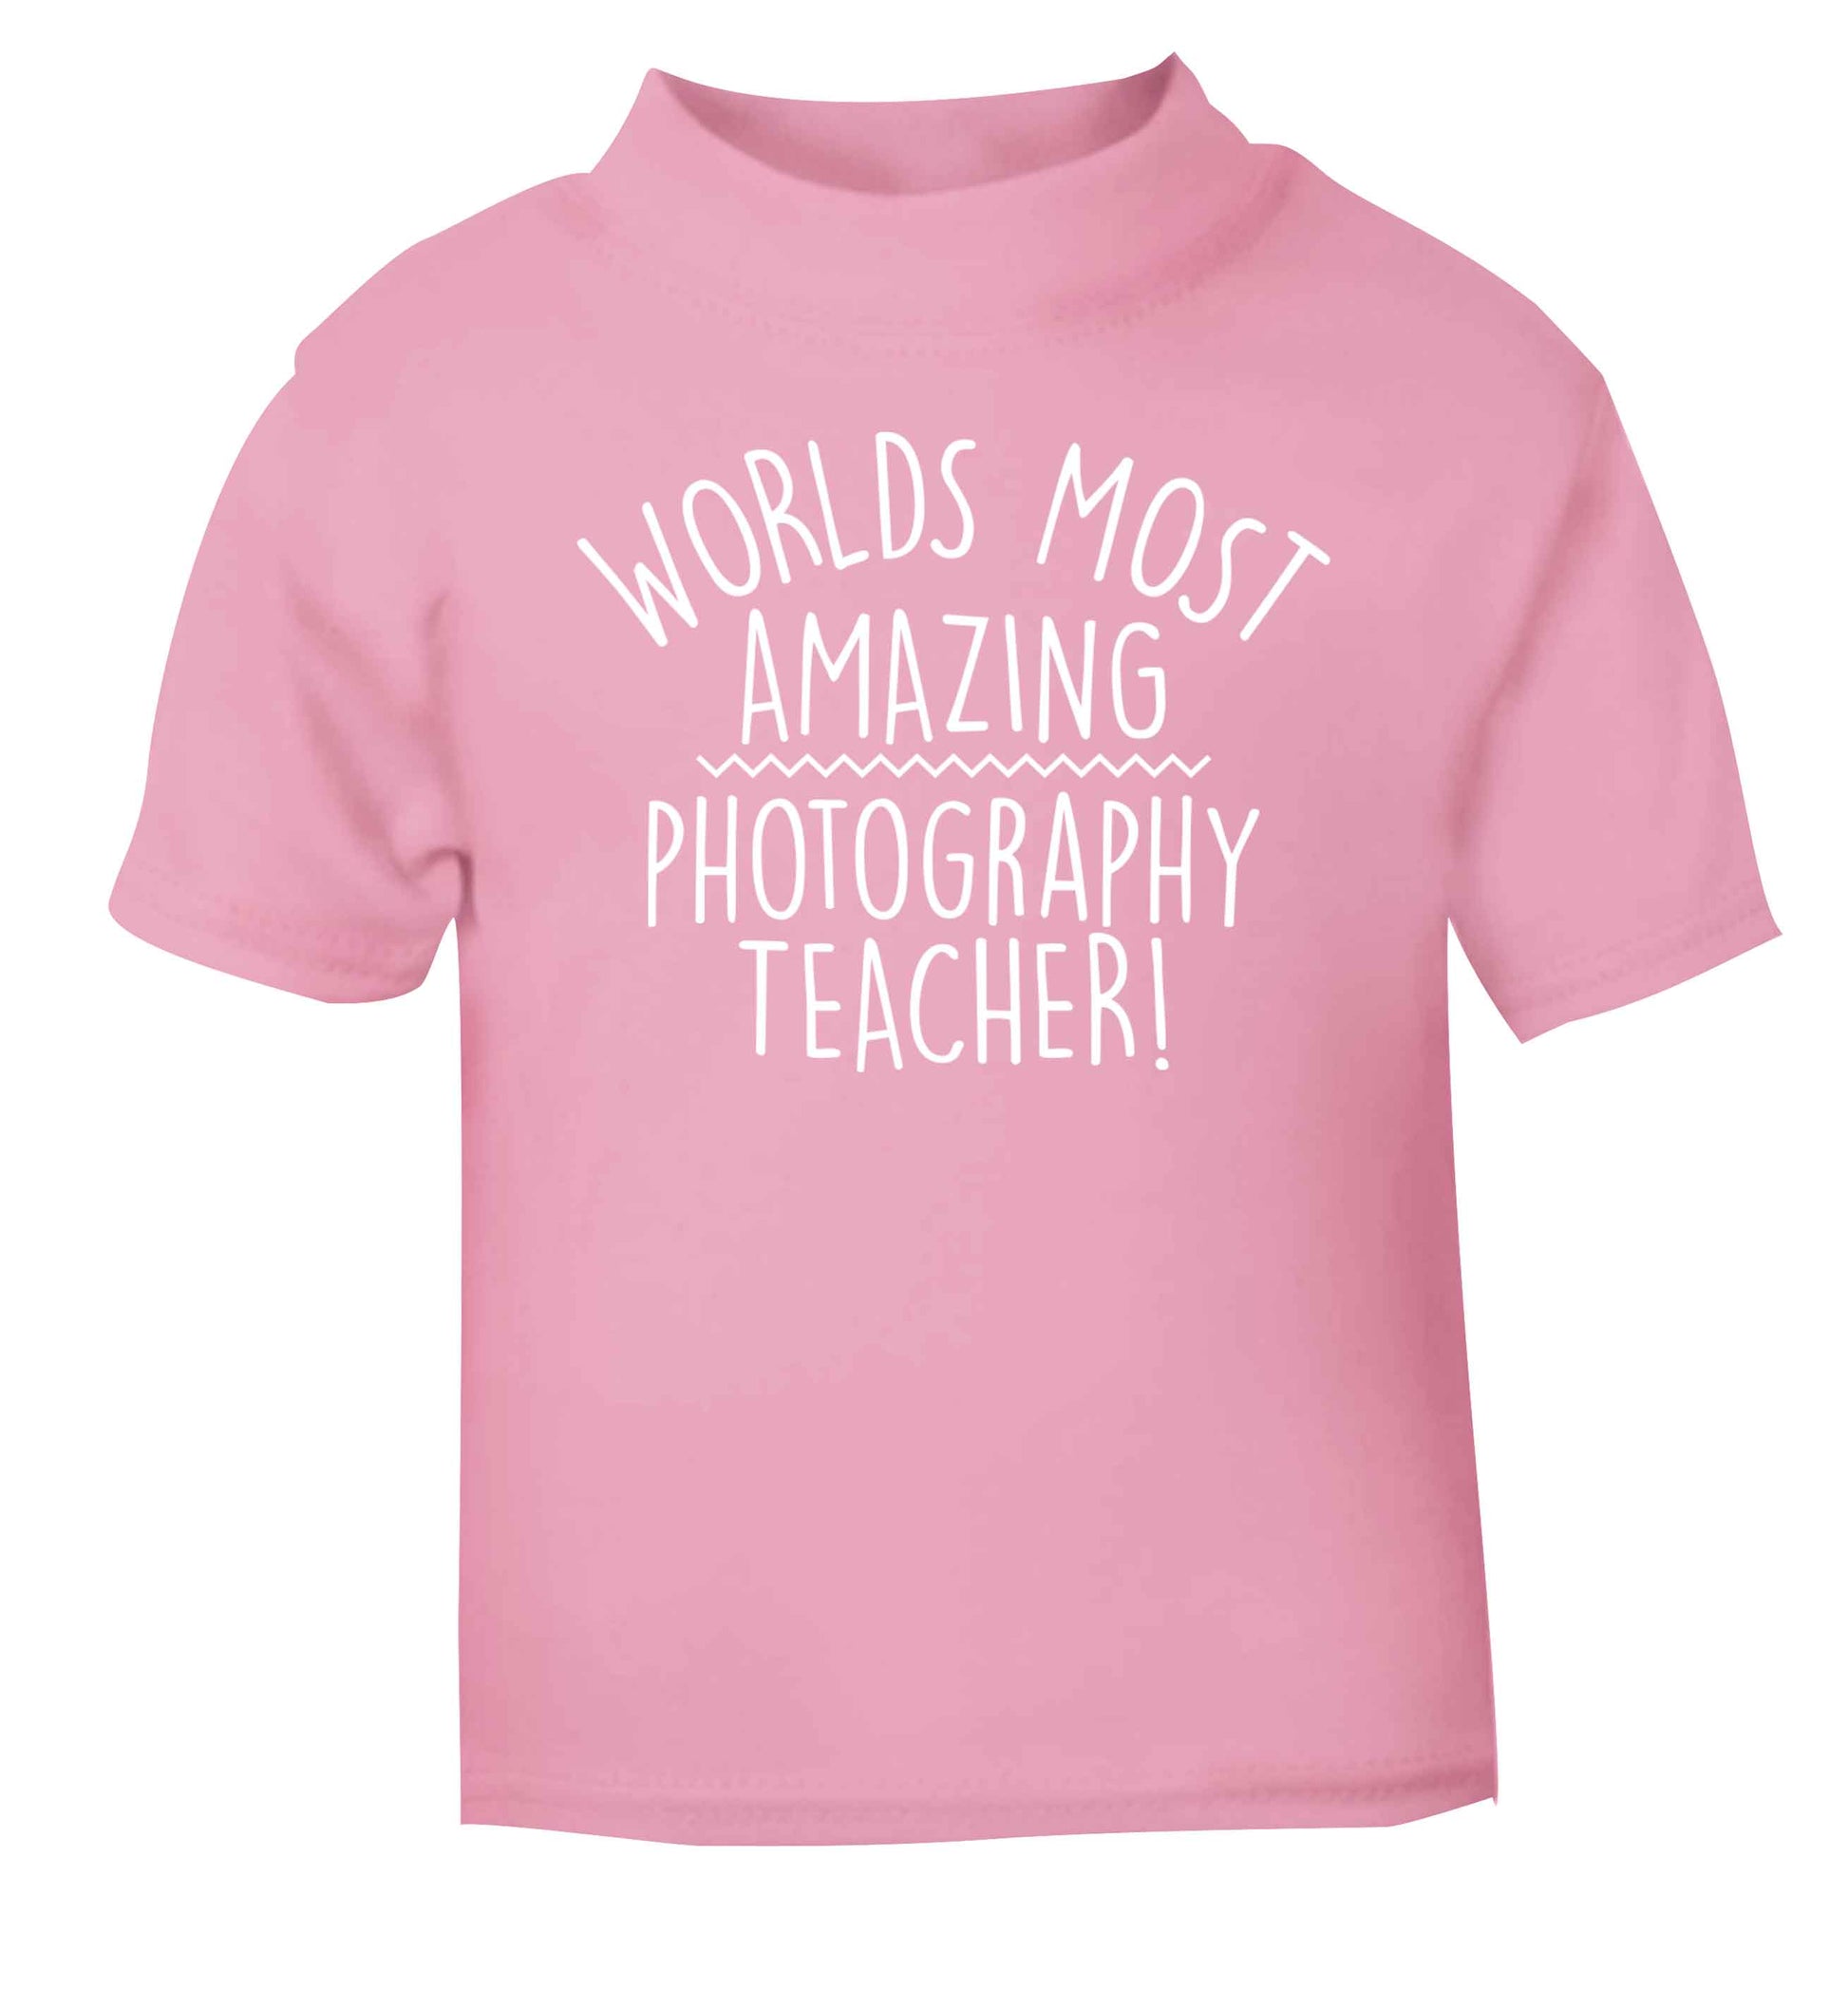 Worlds most amazing photography teacher light pink baby toddler Tshirt 2 Years